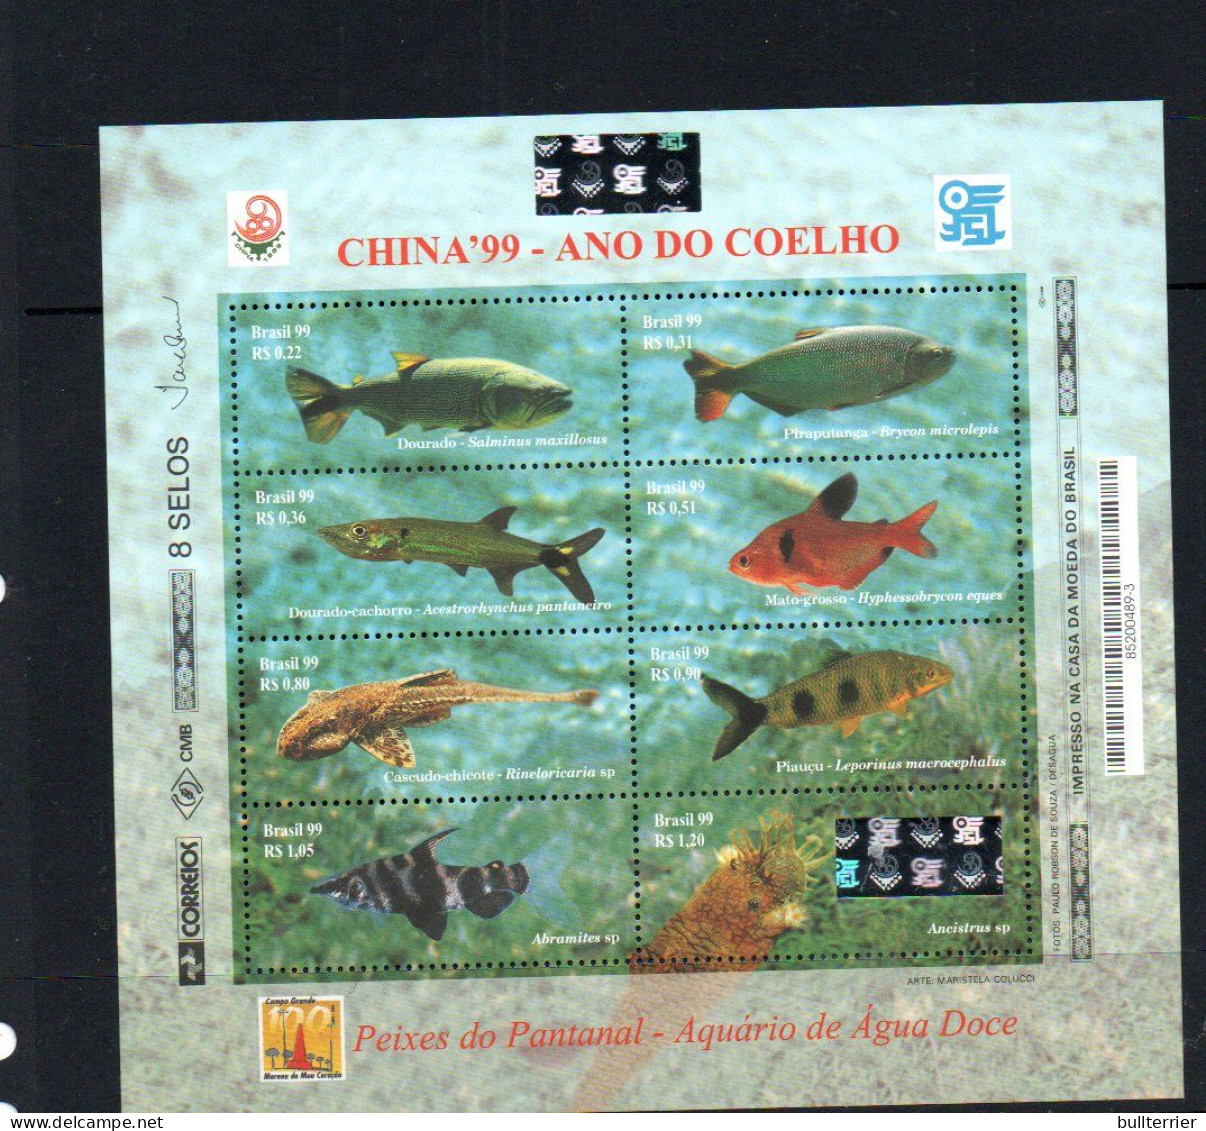 HOLOGRAMS - BRAZIL - 1999- CHINA EXPO FISHES SHEETLET OF 8 MINT NEVER HINGED - Hologrammes